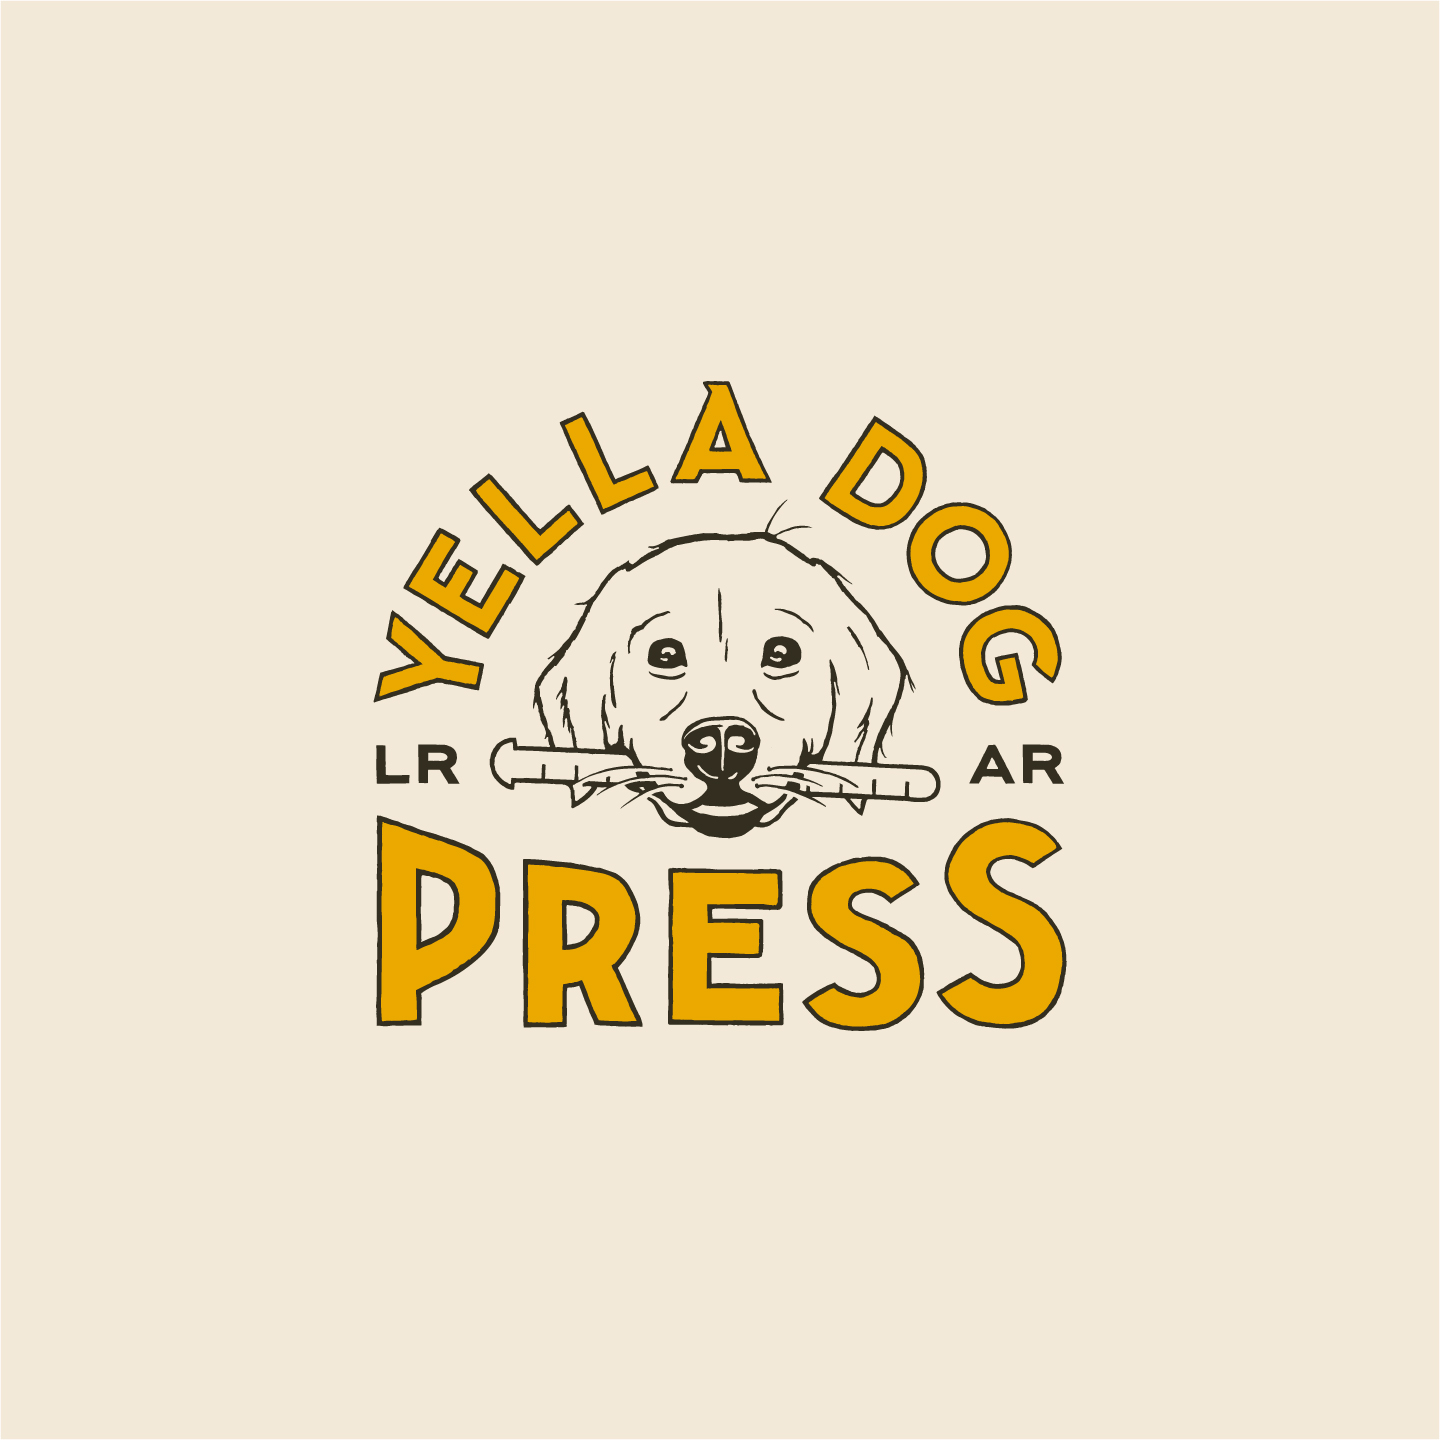 Yella Dog Press logo by Hunter Oden of oden.house